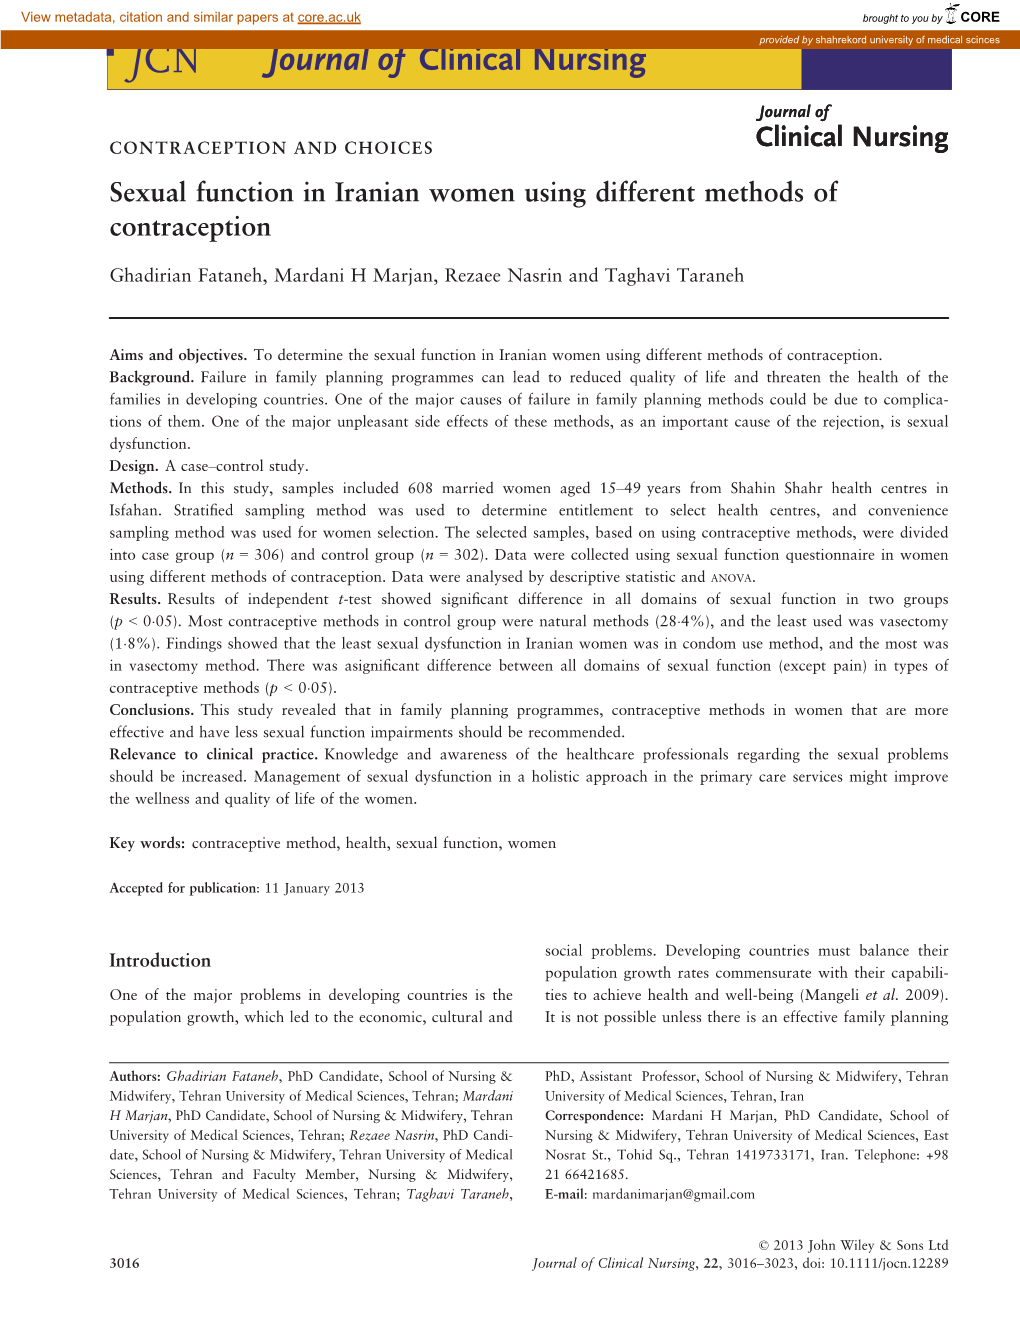 Sexual Function in Iranian Women Using Different Methods of Contraception